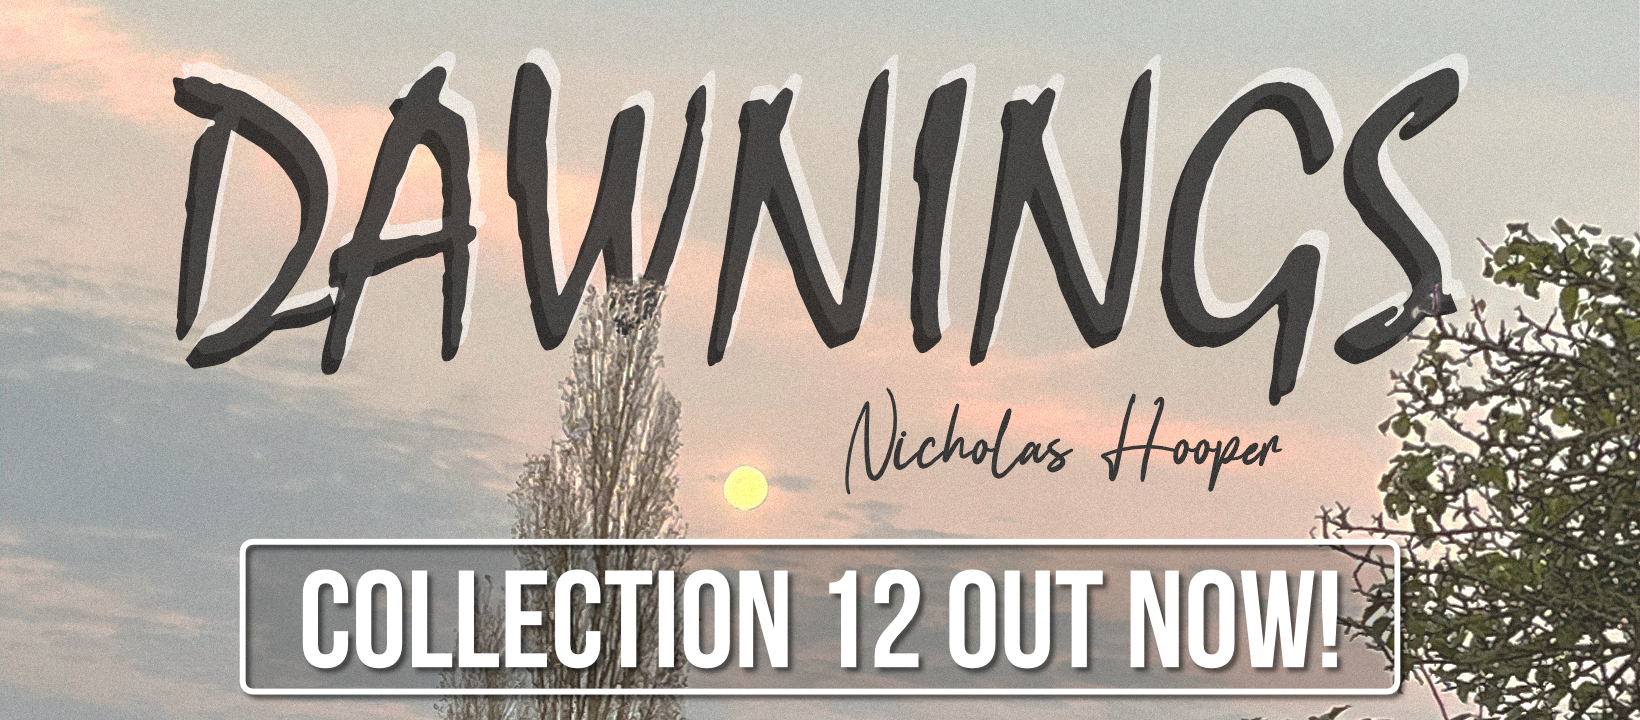 Dawnings, by Nicholas Hooper. New Collection Out Now!